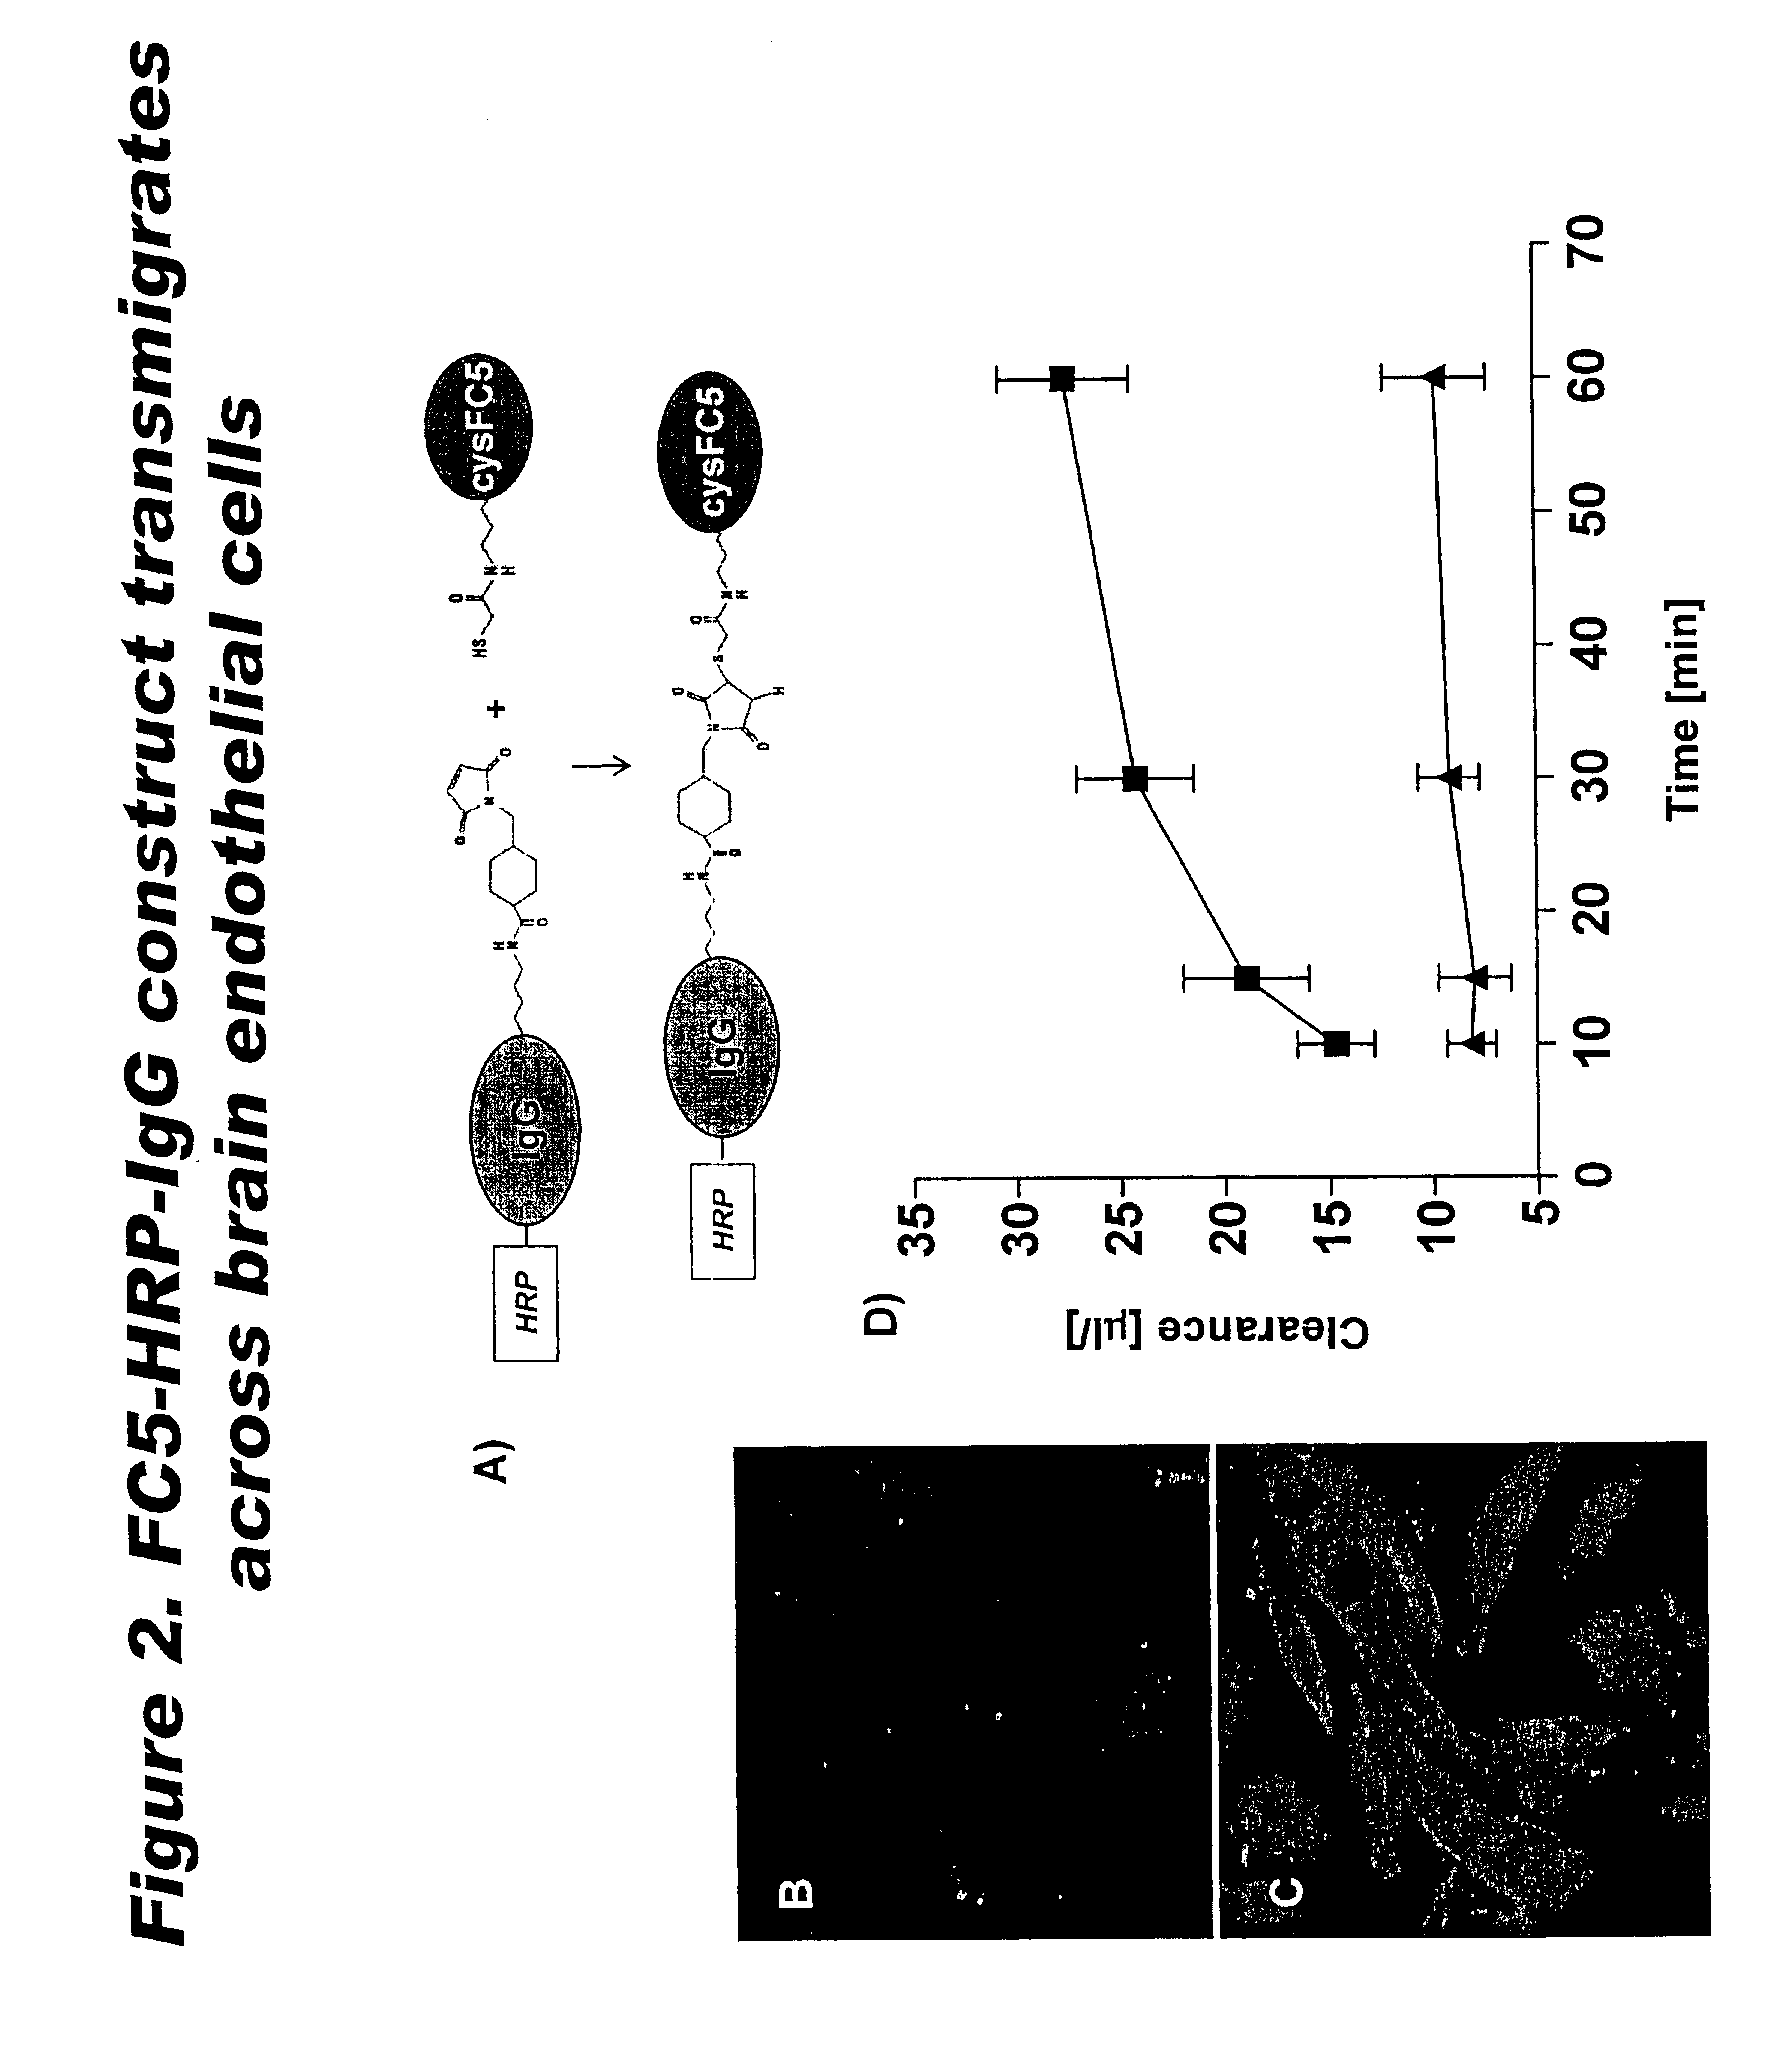 Blood-brain barrier epitopes and uses thereof